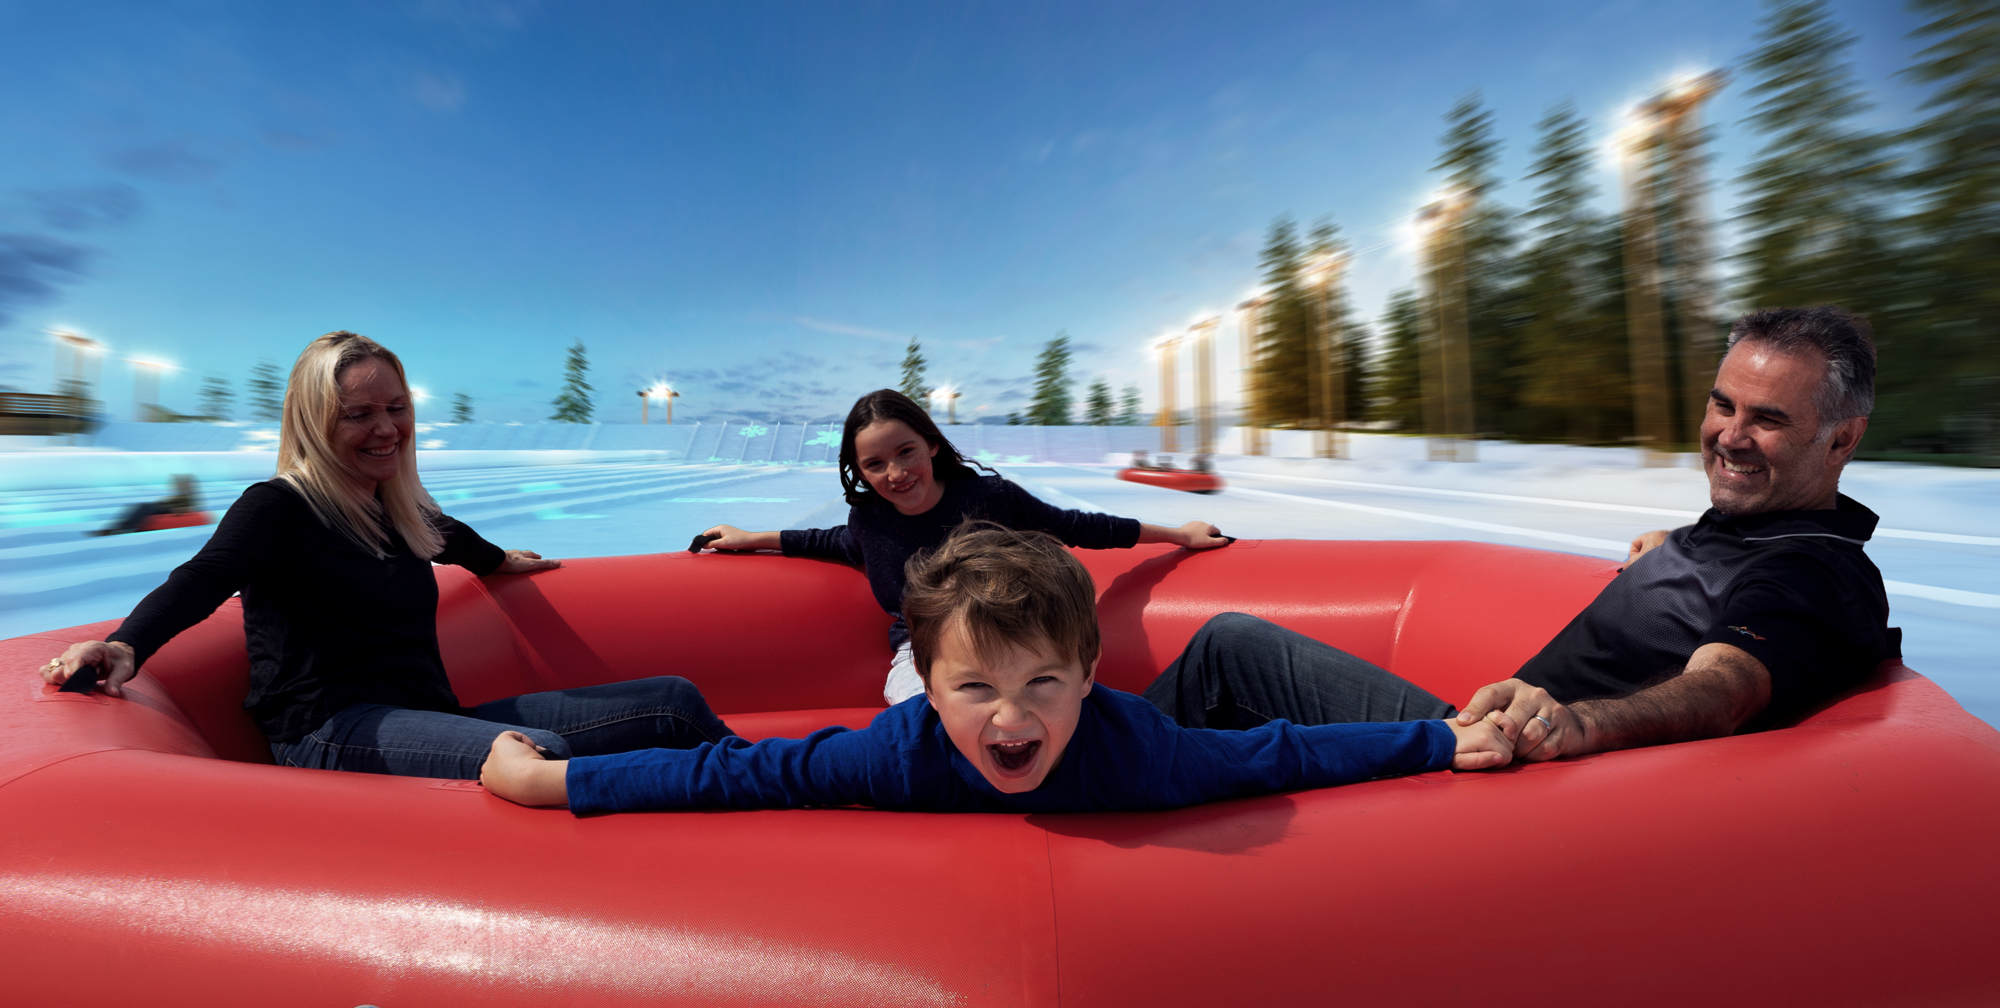 Courtesy. Snowcat Ridge will offer unlimited snow tubing passes for $49.95.